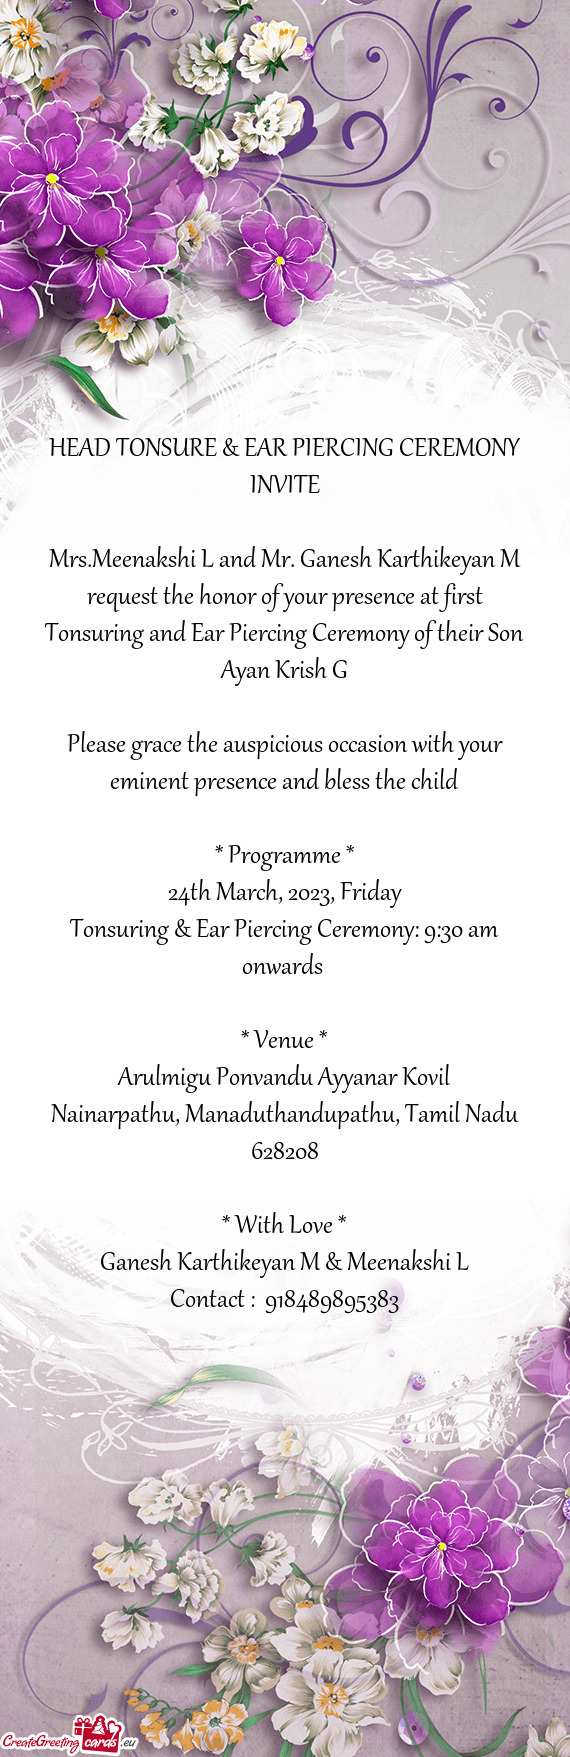 Mrs.Meenakshi L and Mr. Ganesh Karthikeyan M request the honor of your presence at first Tonsuring a